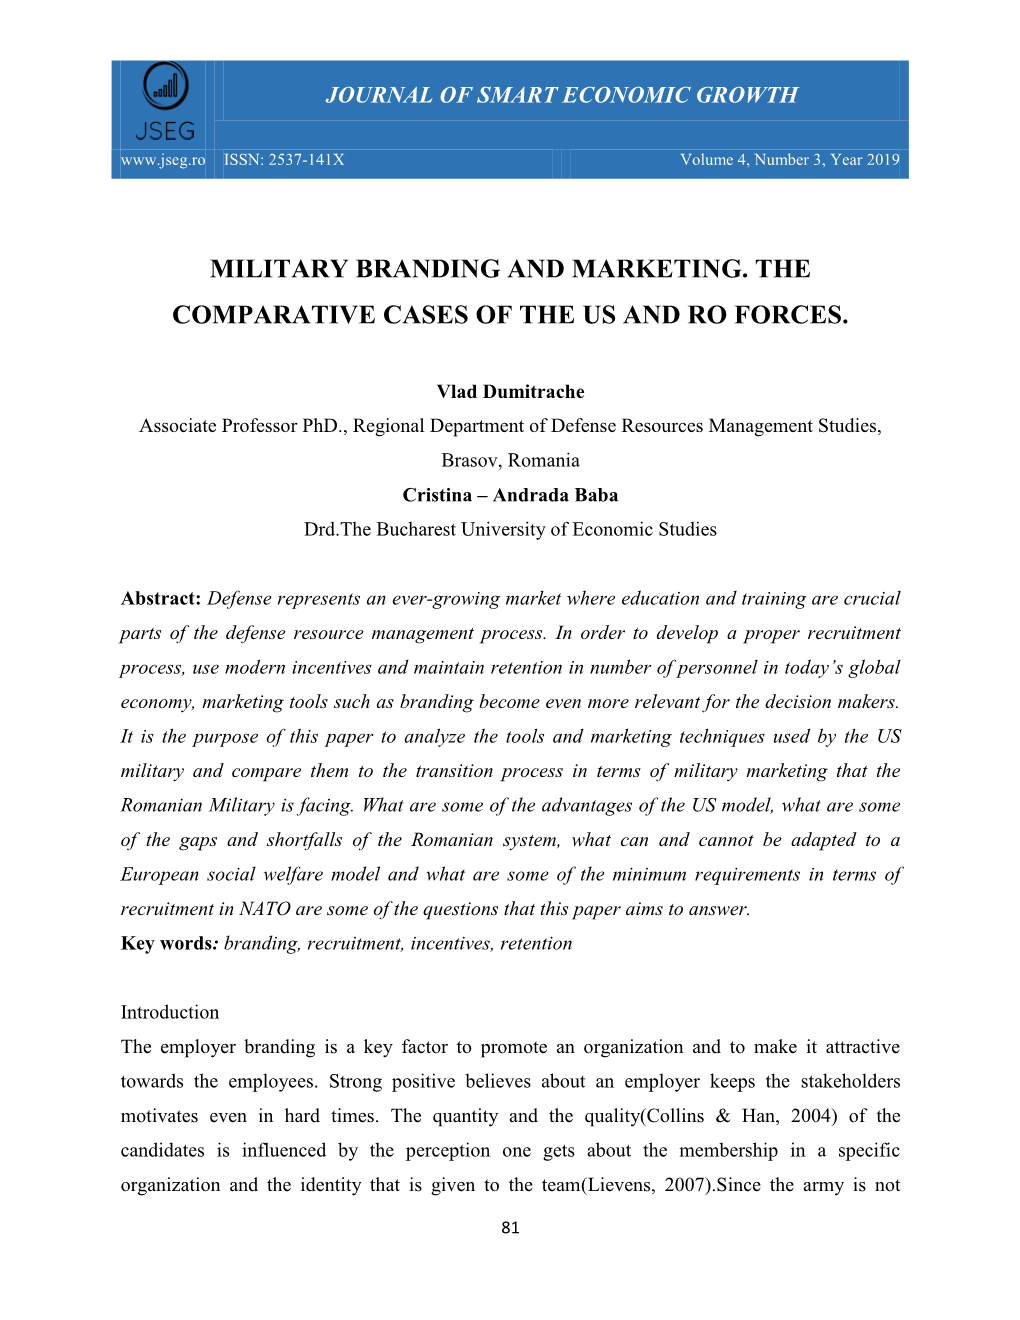 Military Branding and Marketing. the Comparative Cases of the Us and Ro Forces